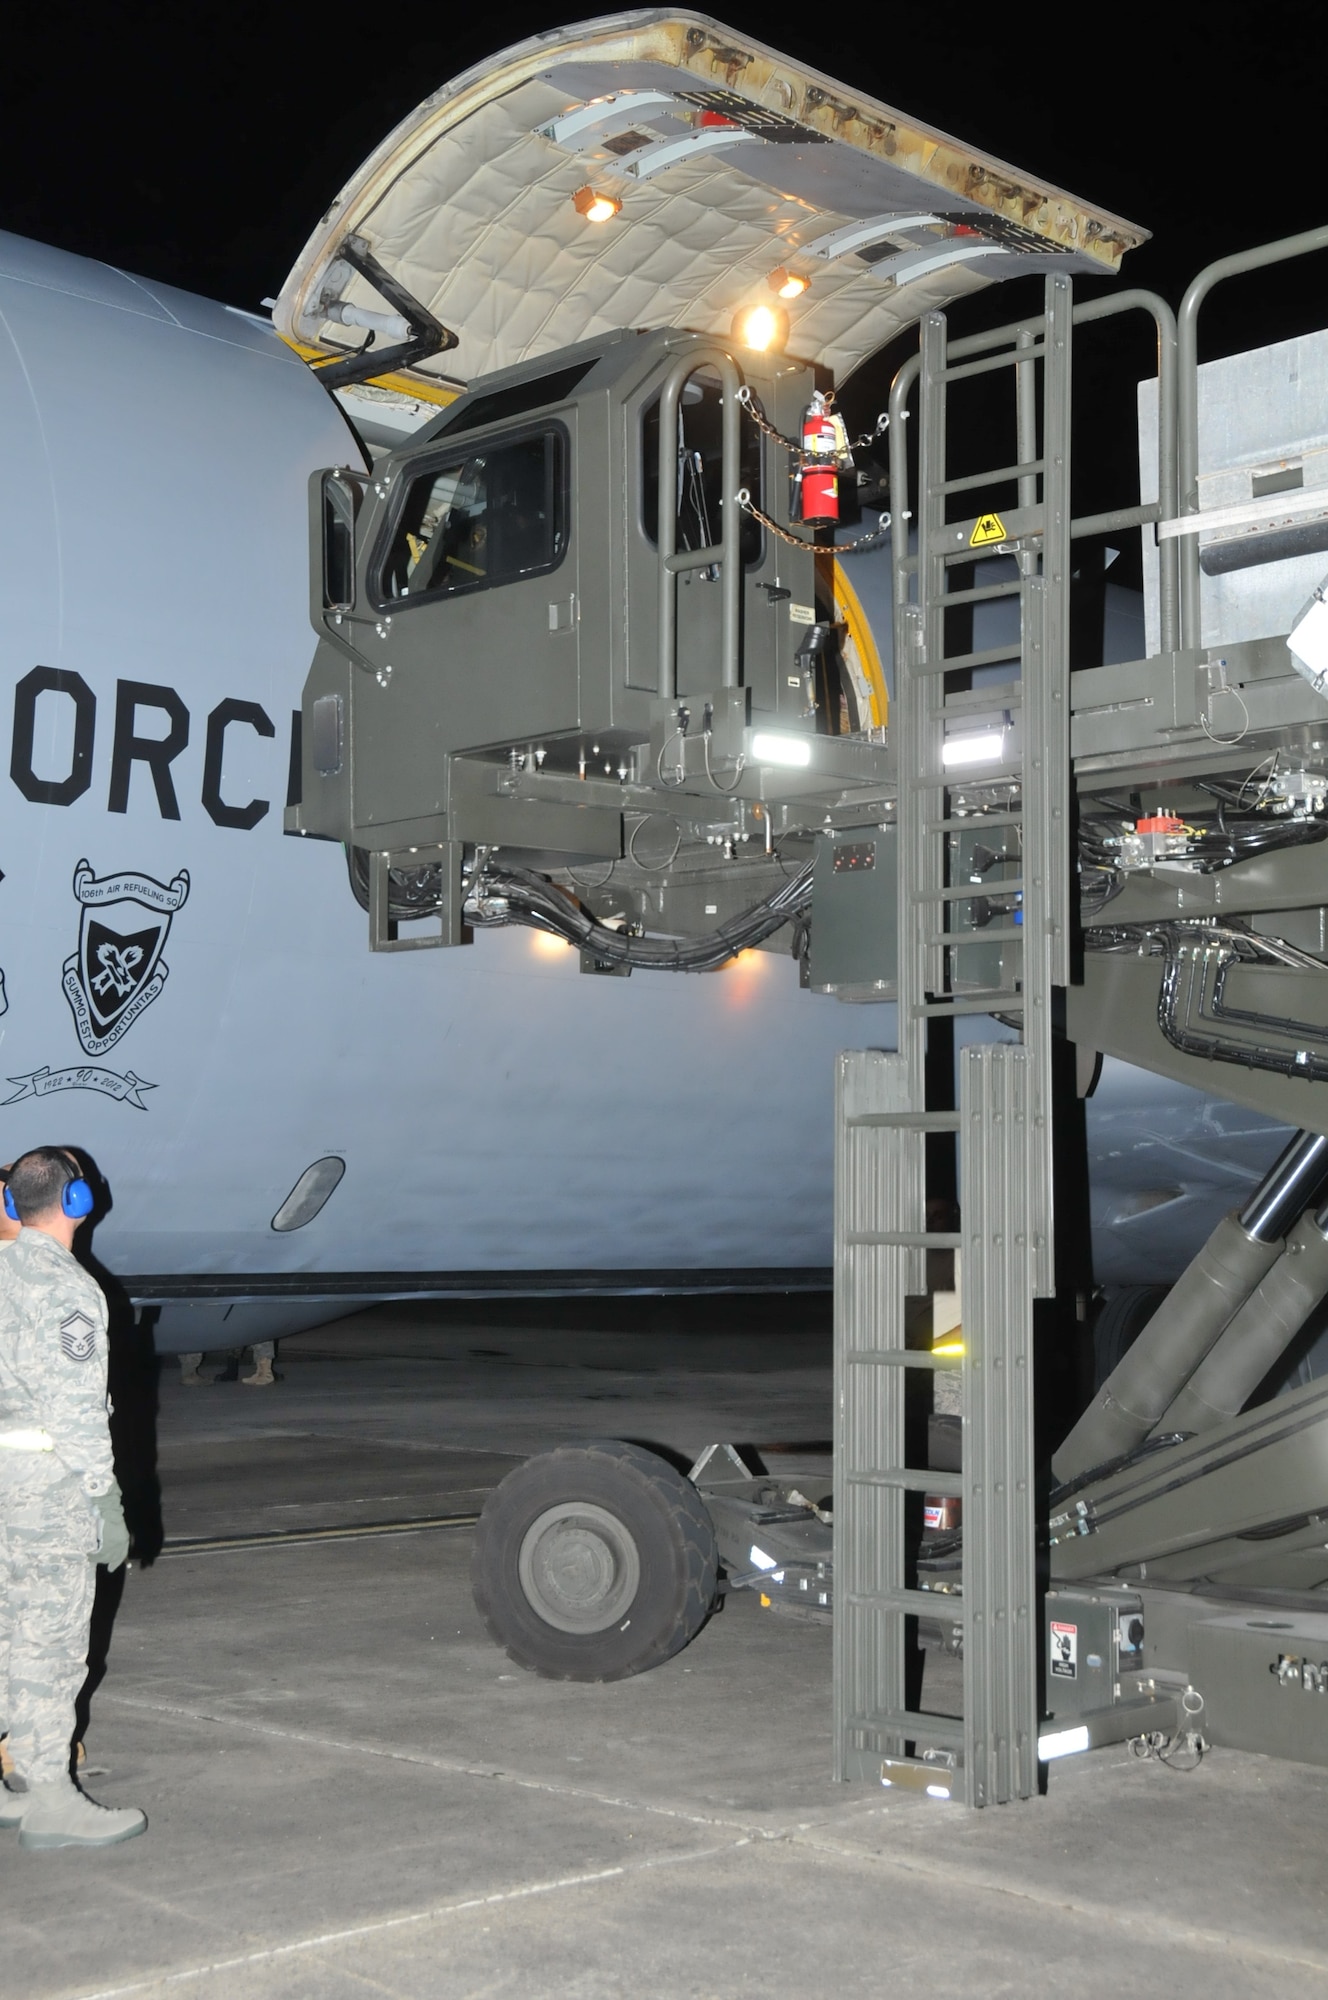 Day or night, aircraft loading operations keep the mission moving in support of domestic operations at Muniz Air National Guard Base for the Vigilant Guard Exercise. (U.S. Air National Guard courtesy photo)